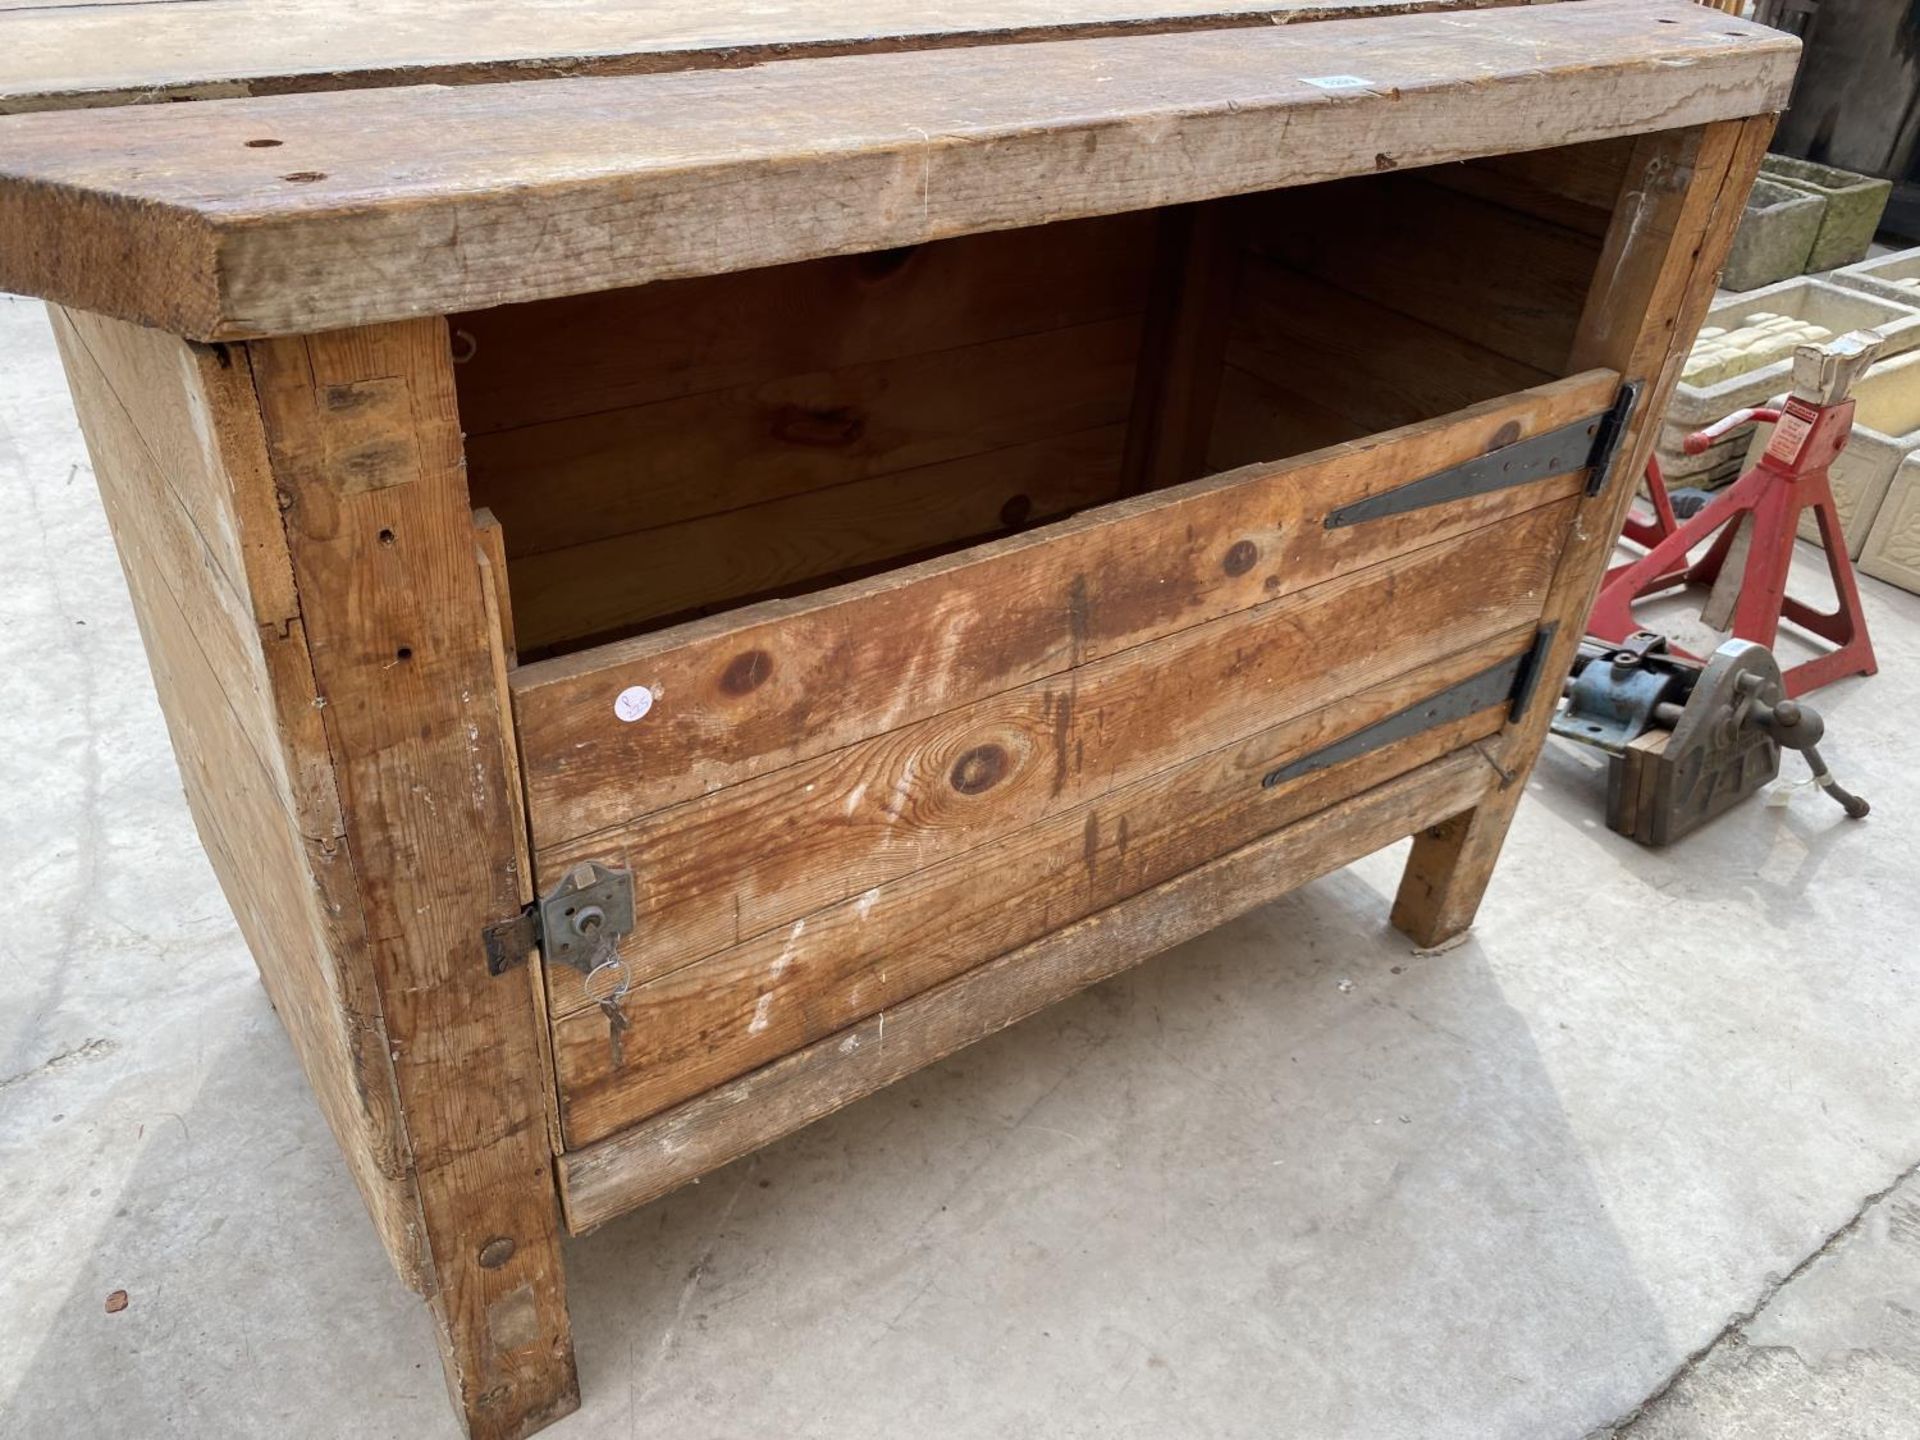 A VINTAGE WOODEN WORK BENCH WITH LOWER CUPBOARD - Image 2 of 4